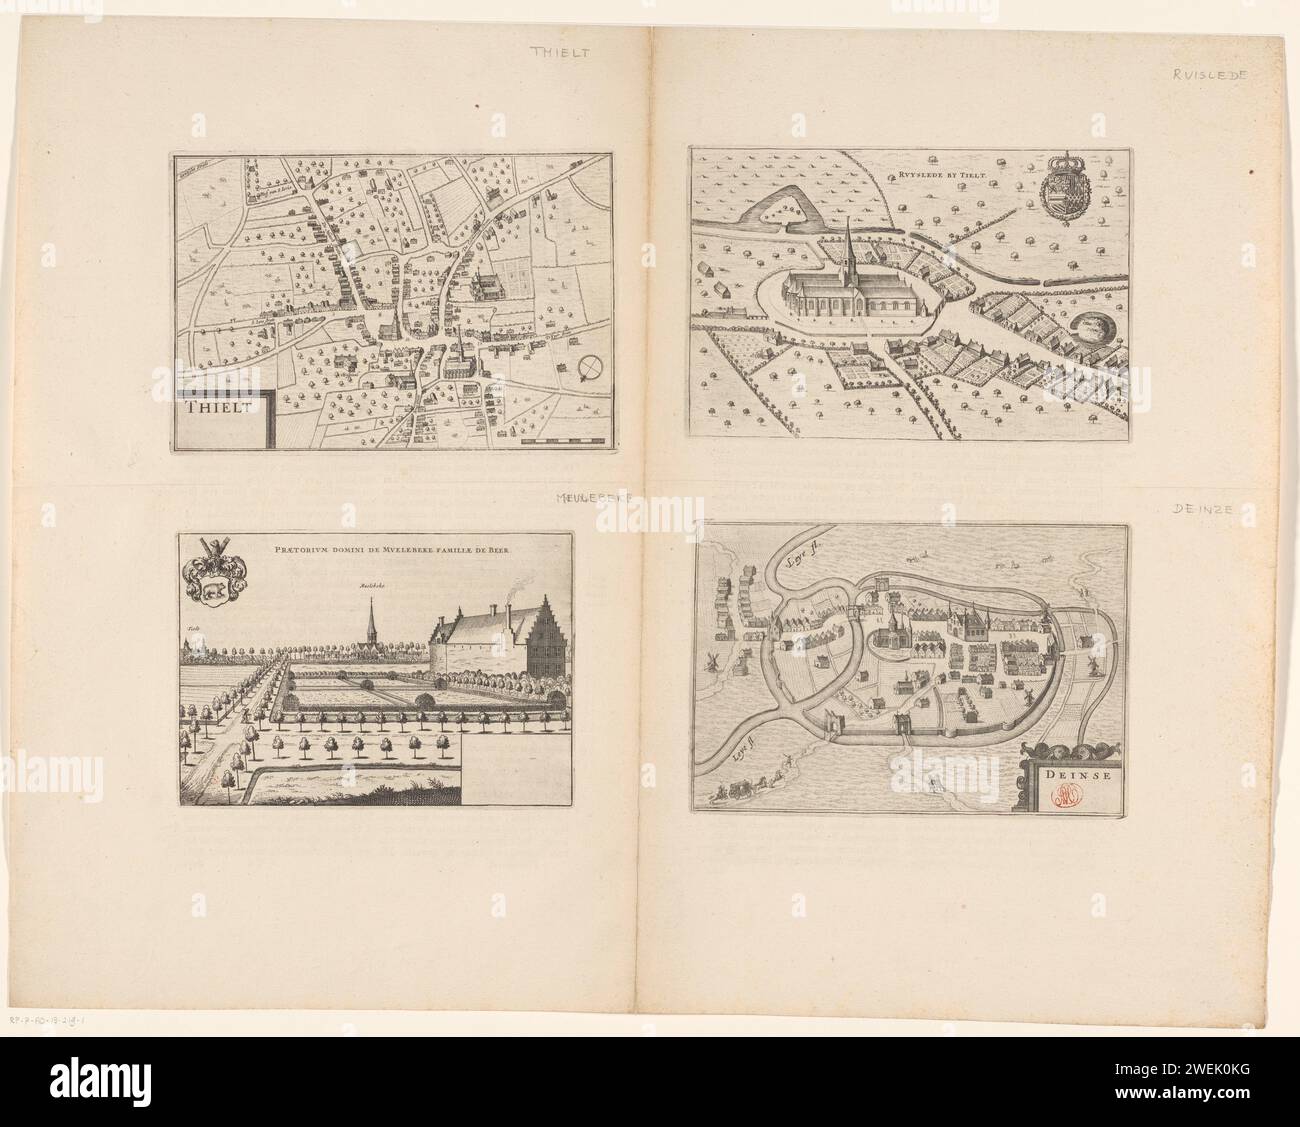 View of Ruiselede, Deinze and Meulebeke and a map of Tielt, Anonymous, 1652 print At the top left a map of Tielt with buildings in a nutshell perspective. Bottom left the title cartouche and bottom right a bowl without a scale. At the top right a face on Ruiselede in a nutshell perspective. At the top right the weapon of the king of Spain. At the bottom right a face on Deinze in a nutshell perspective. At the bottom right the title cartouche. Bottom left a face on the castle of Ter Borcht with Meulebeke behind it. At the top left the weapon of Meulebeke, also the coat of arms of the De Beer fa Stock Photo